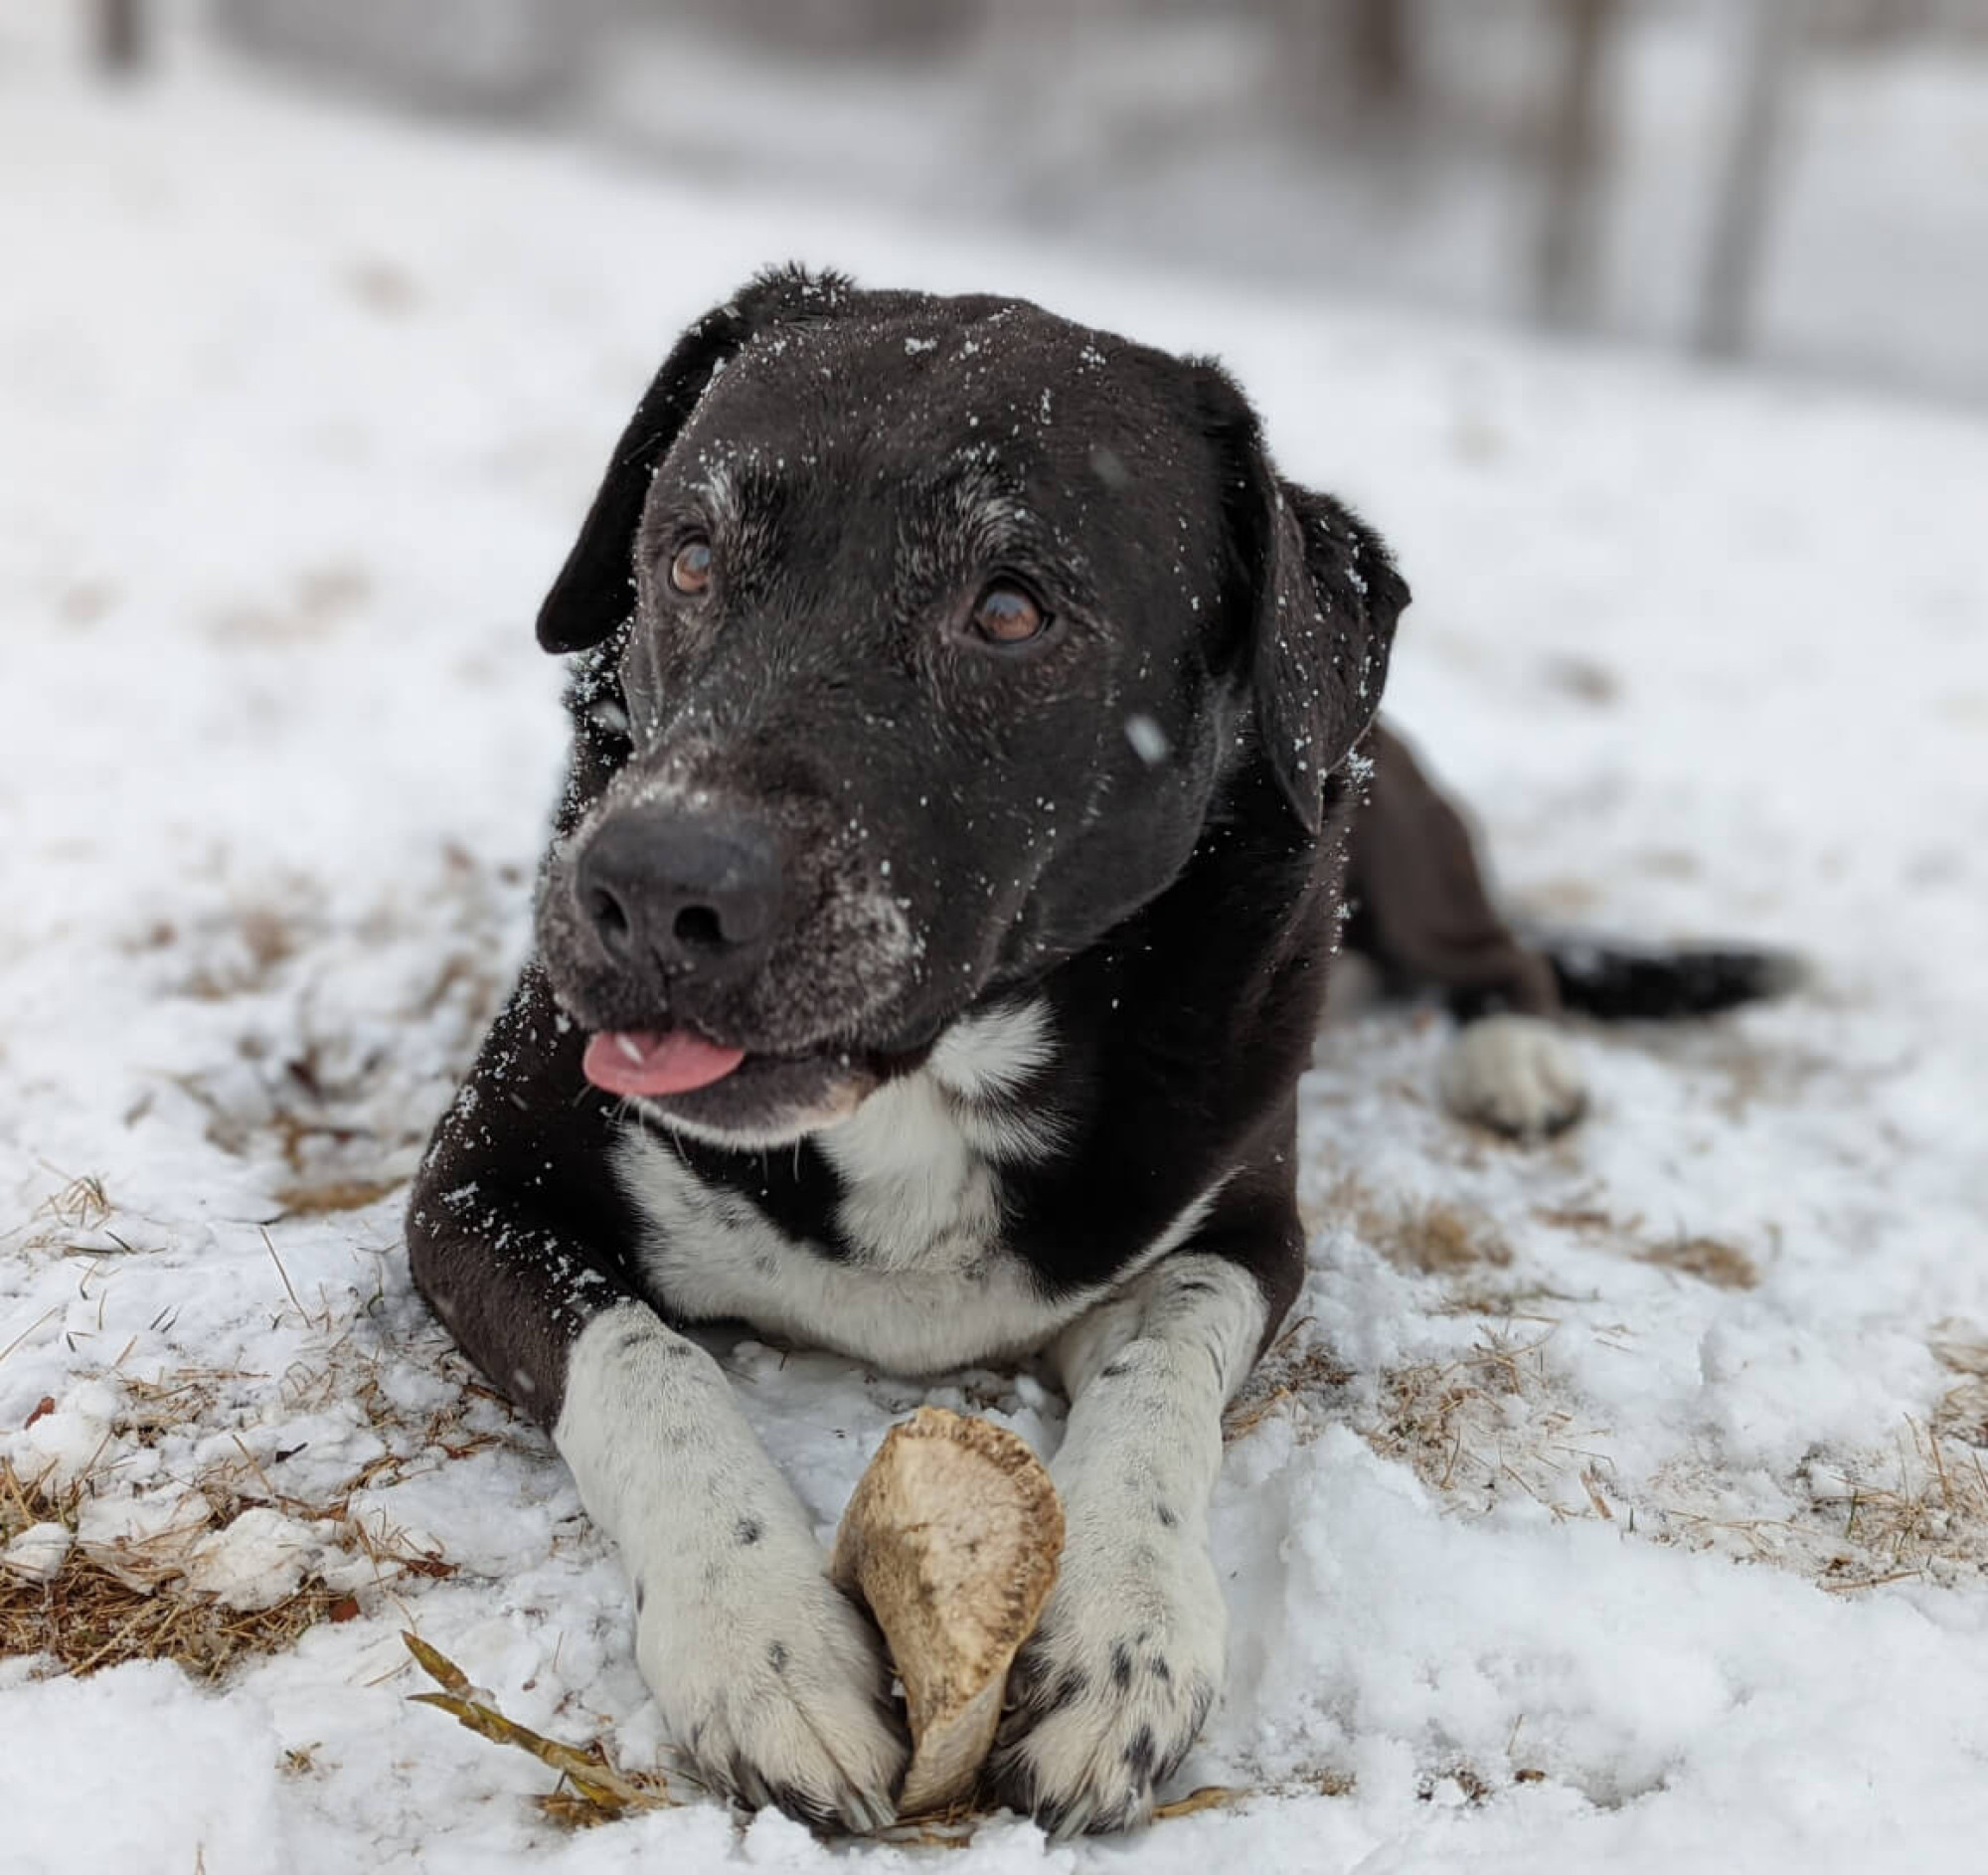 A brown and white dog standing in the snow looking at the camera